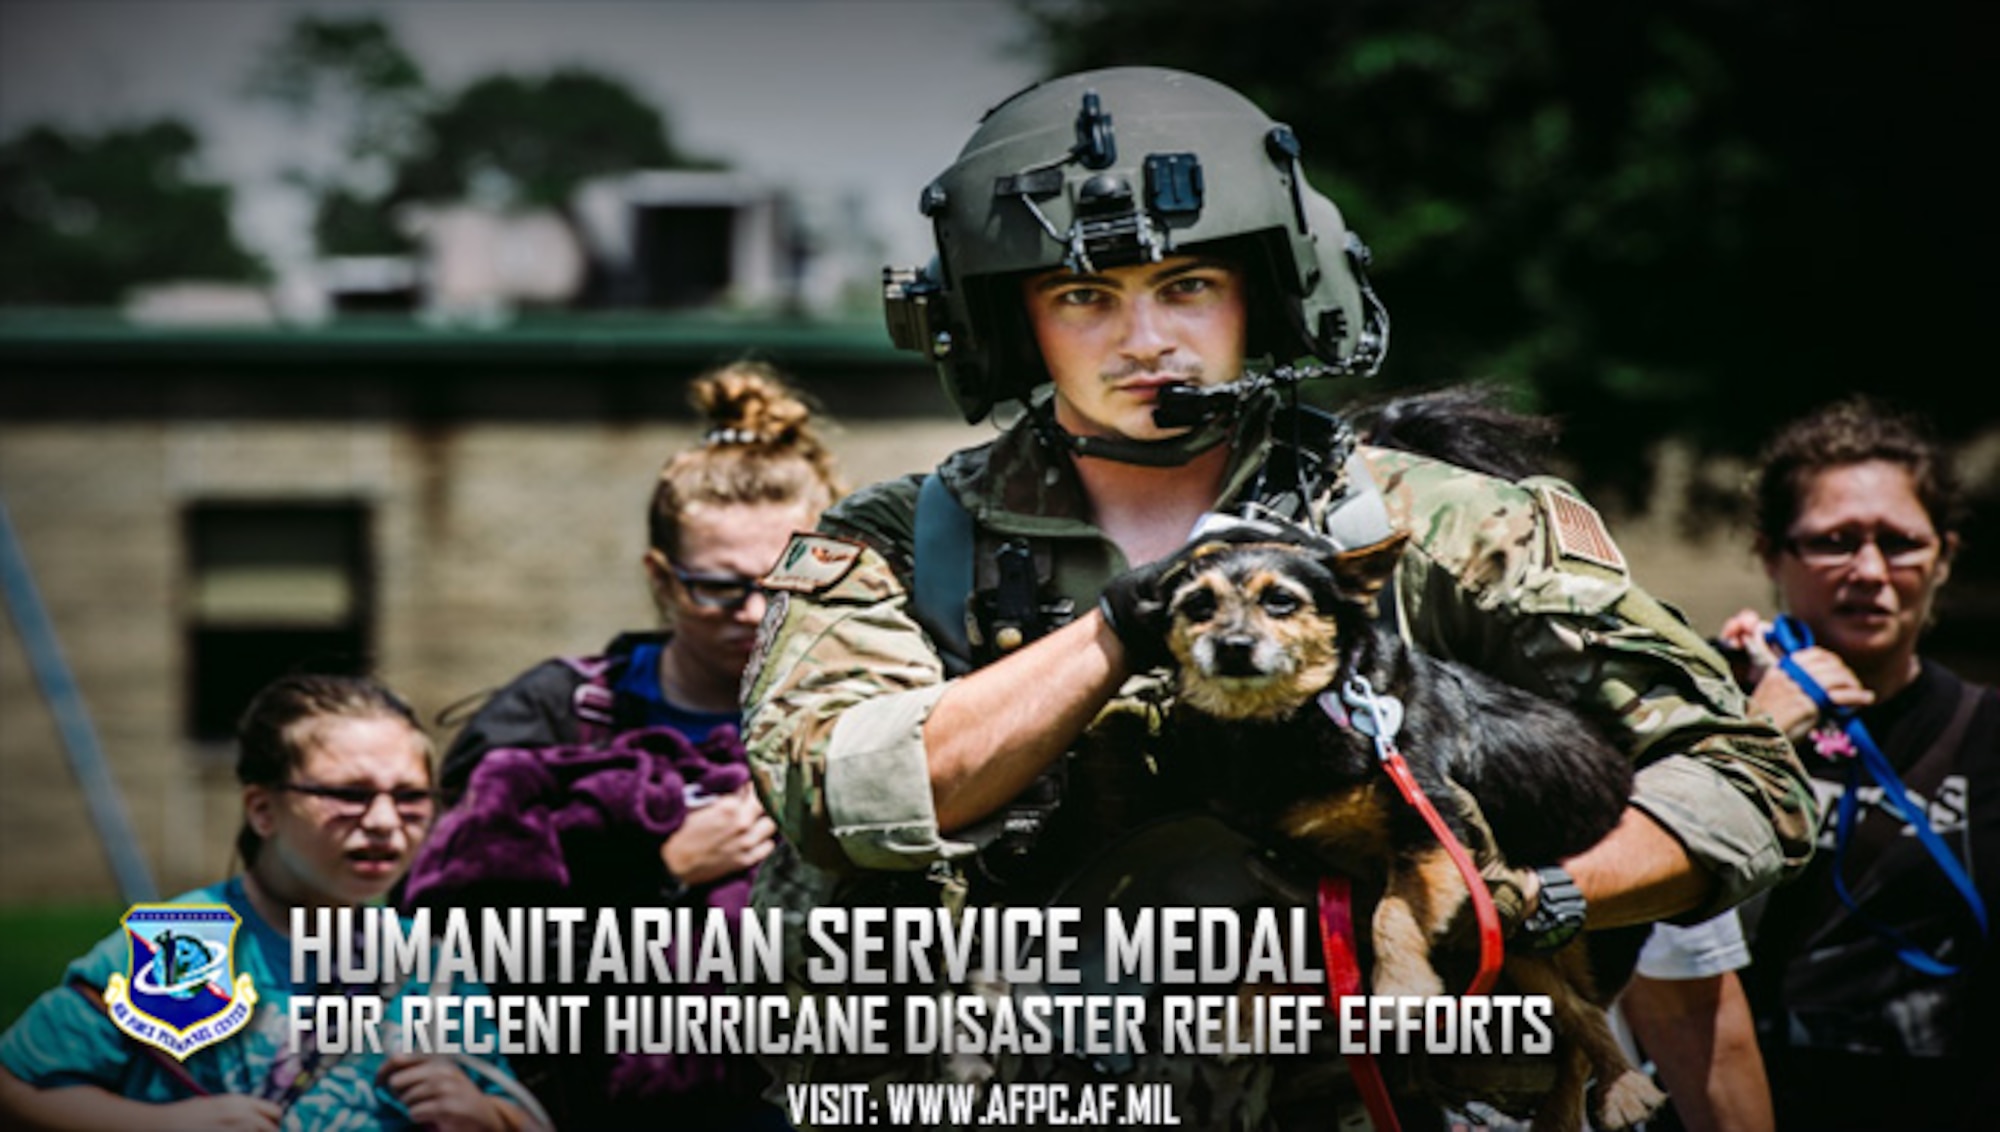 Officials announce authorization of Humanitarian Service Medal for service members who provided disaster relief during Hurricanes Harvey, Irma or Maria. (U.S. Air Force courtesy photo)